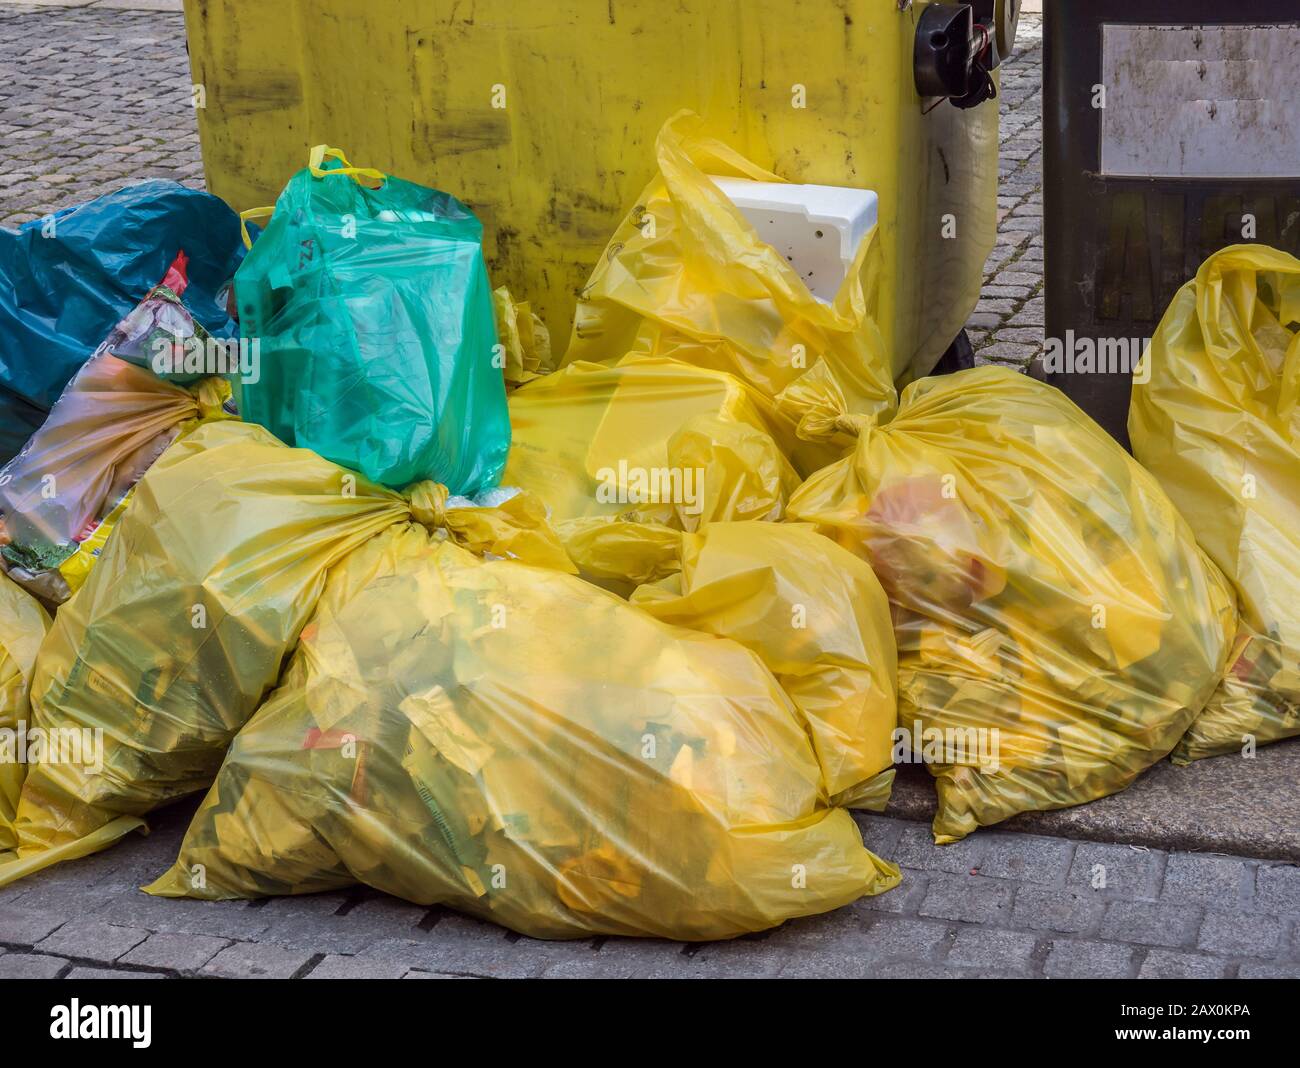 Yellow bags full of plastic waste Stock Photo - Alamy